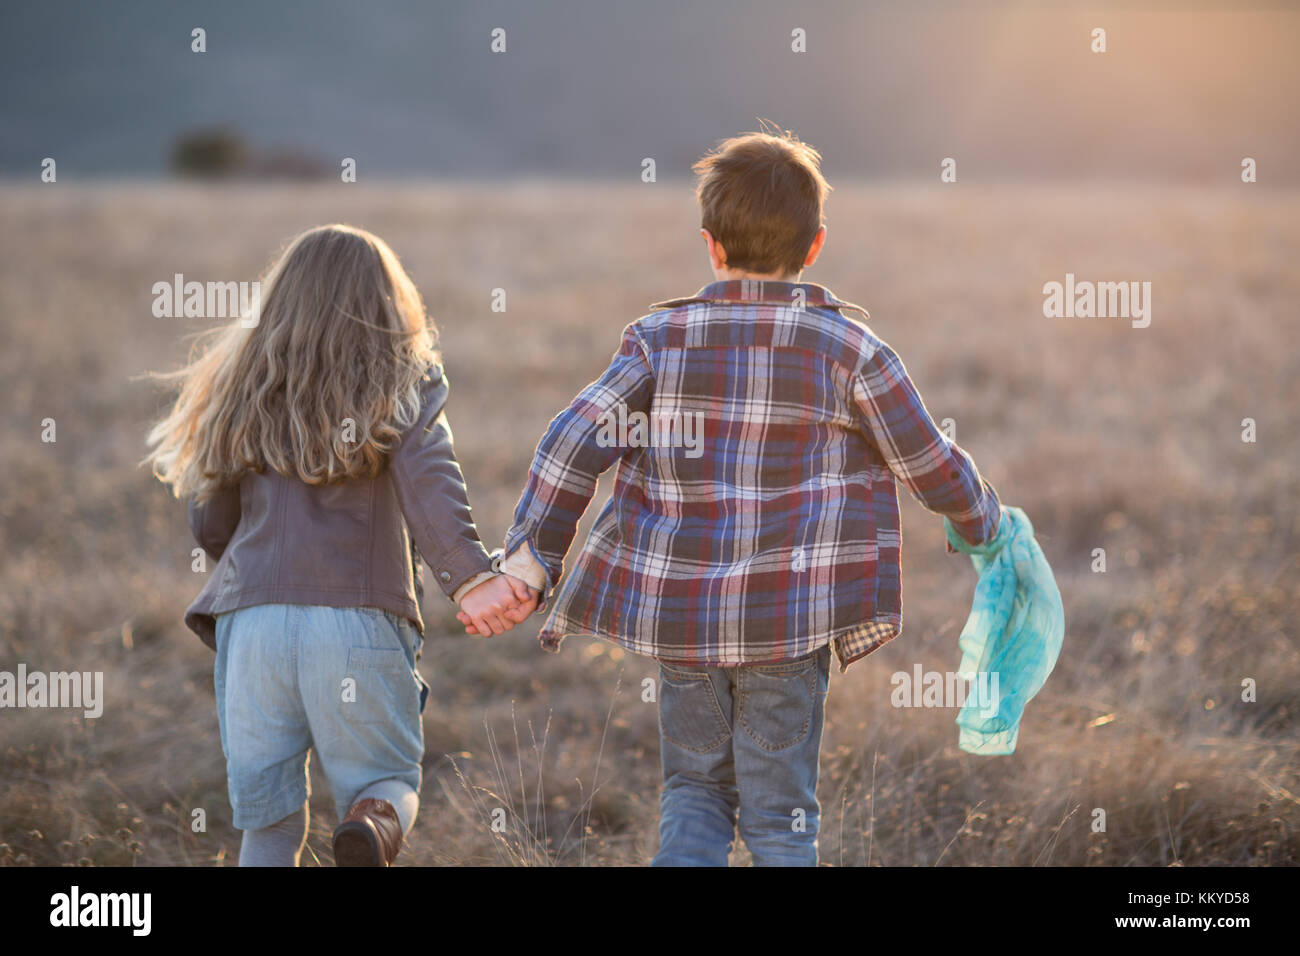 Kids Boy And A Girl Running On Sunny A Field Holding Hands Stock Photo Alamy